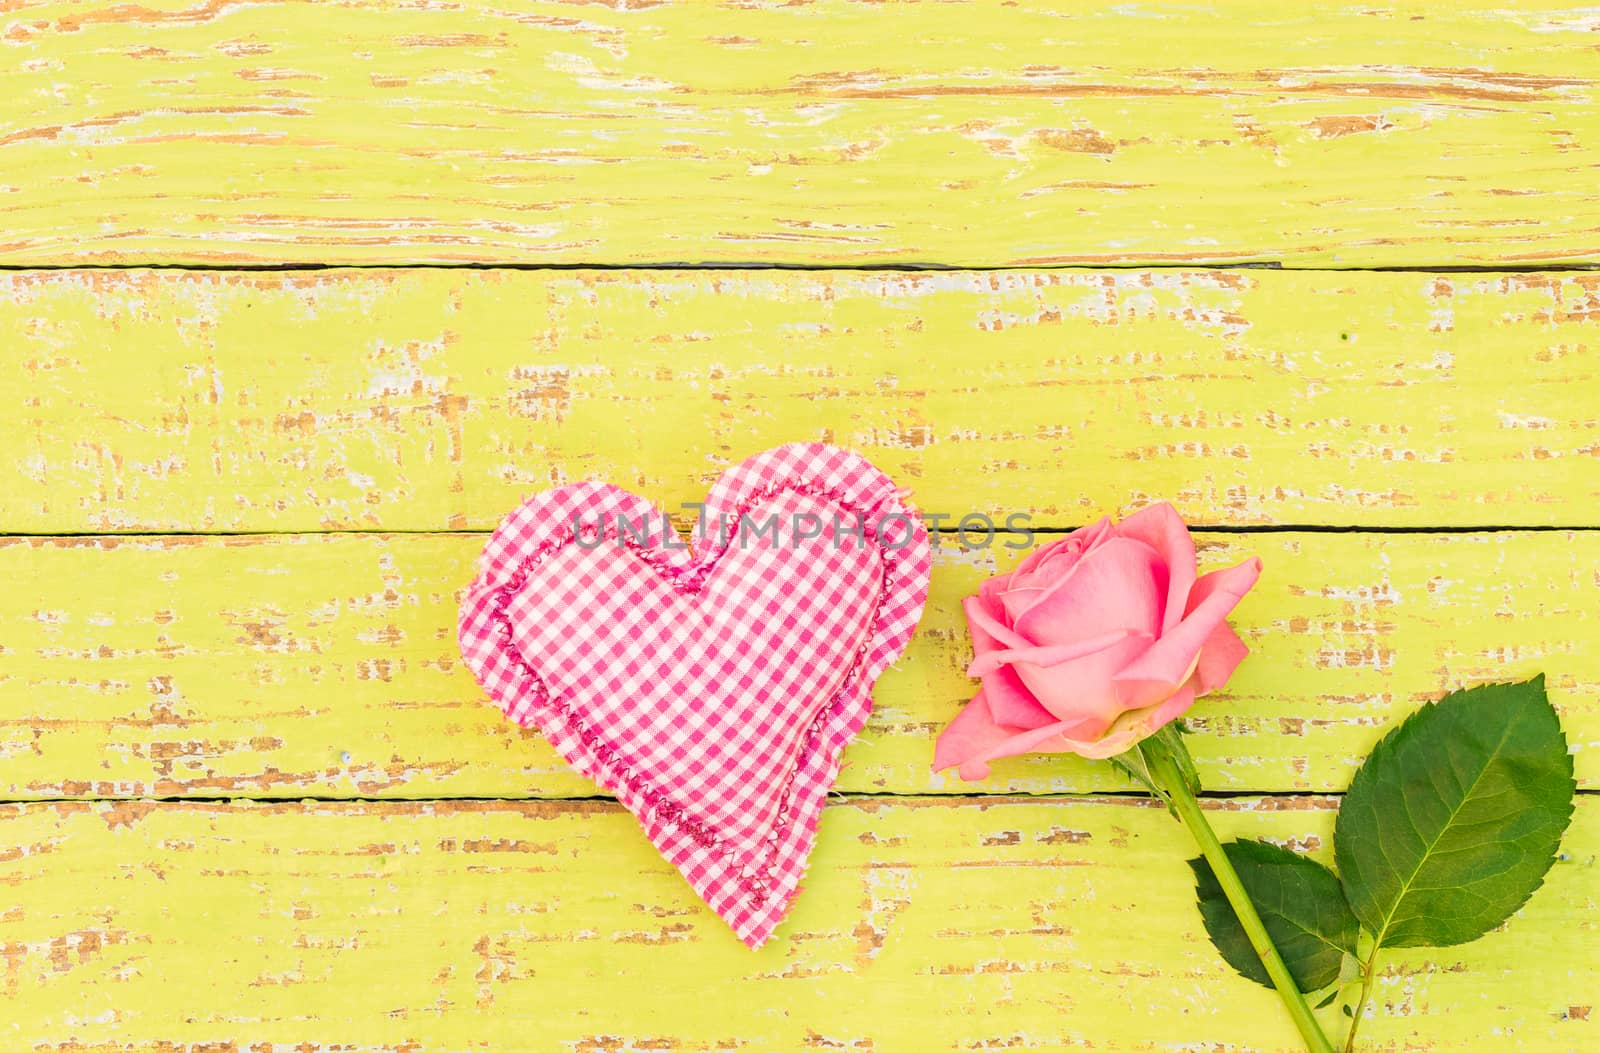 Pink heart and rose flower on yellow wooden background for Mothers day